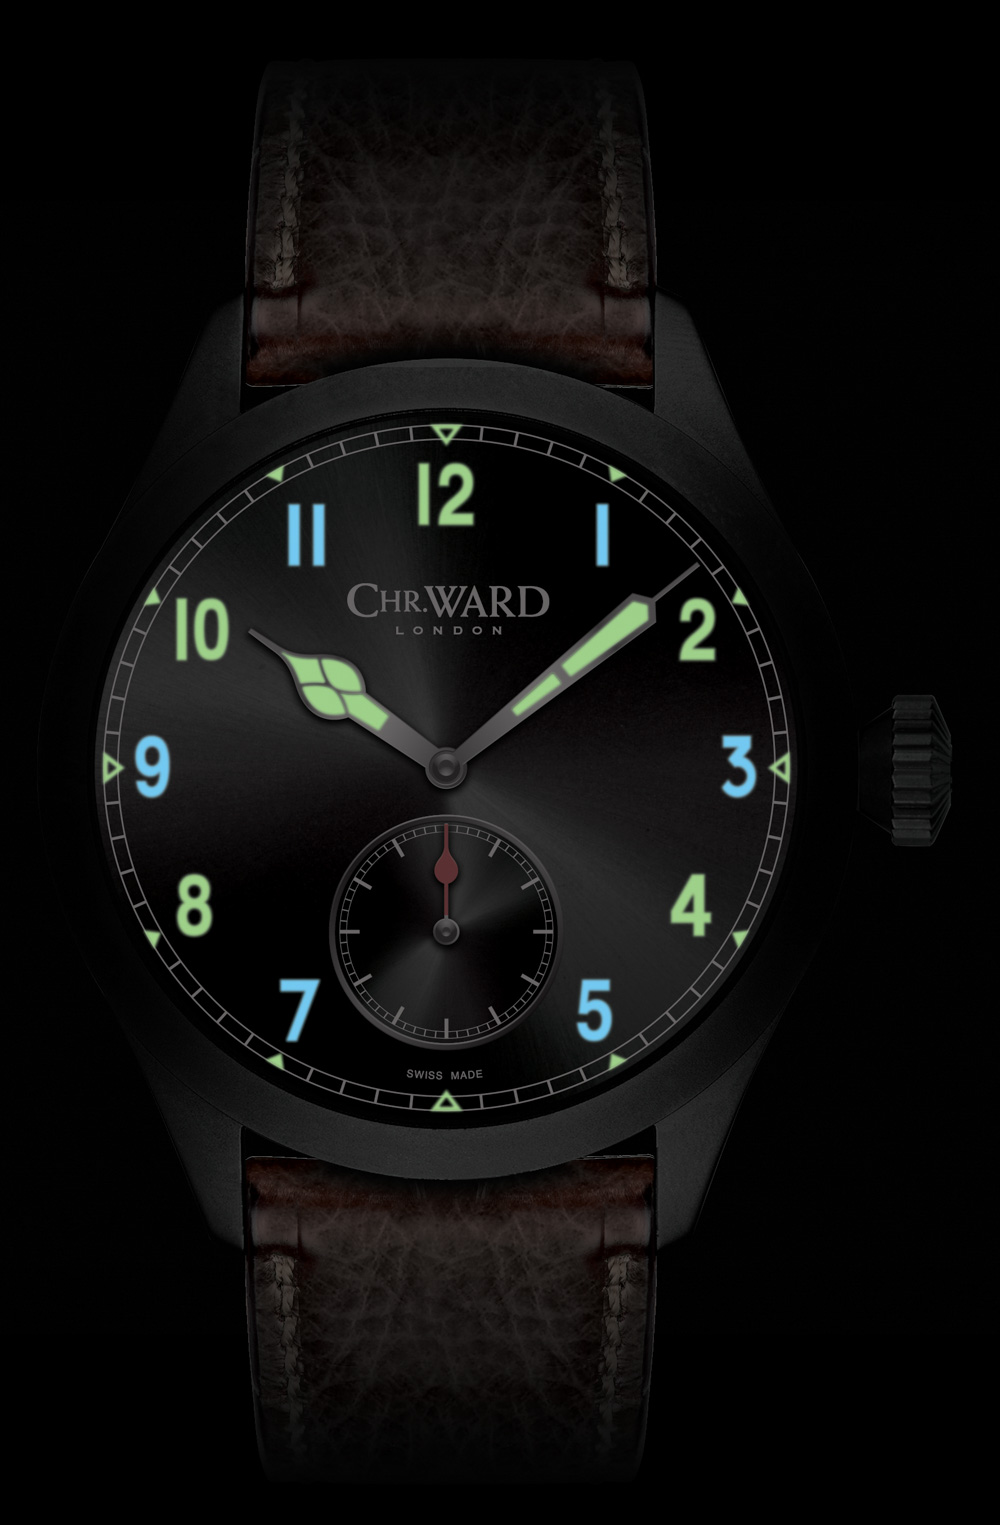 Christopher Ward C8 P7350 Chronometer Watch Silent Auction In Honour Of England's Remembrance Day Sales & Auctions 